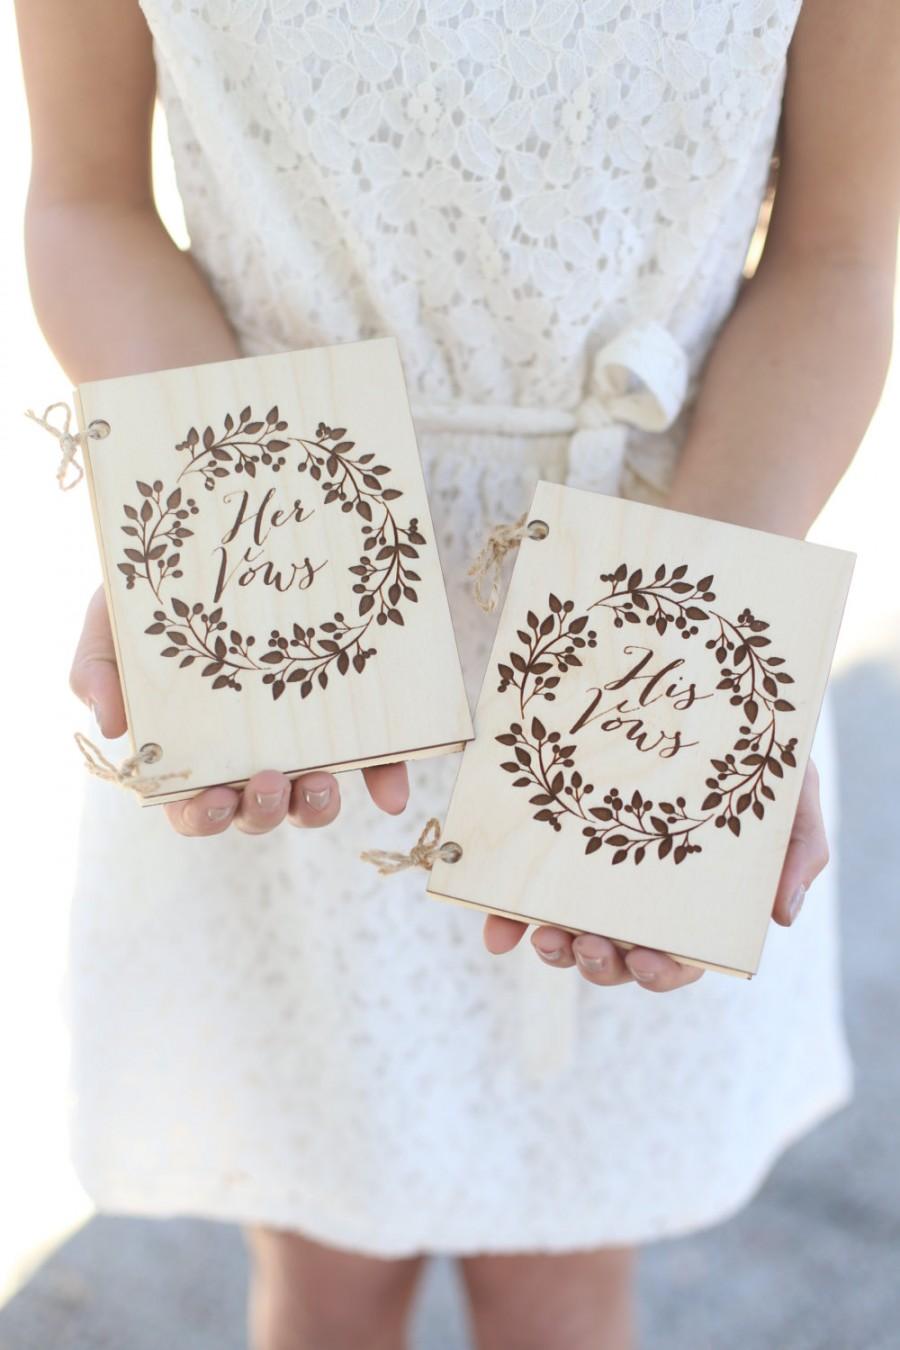 Wedding - His & Hers Rustic Wood Vow Books Barn Wedding QUICK shipping available